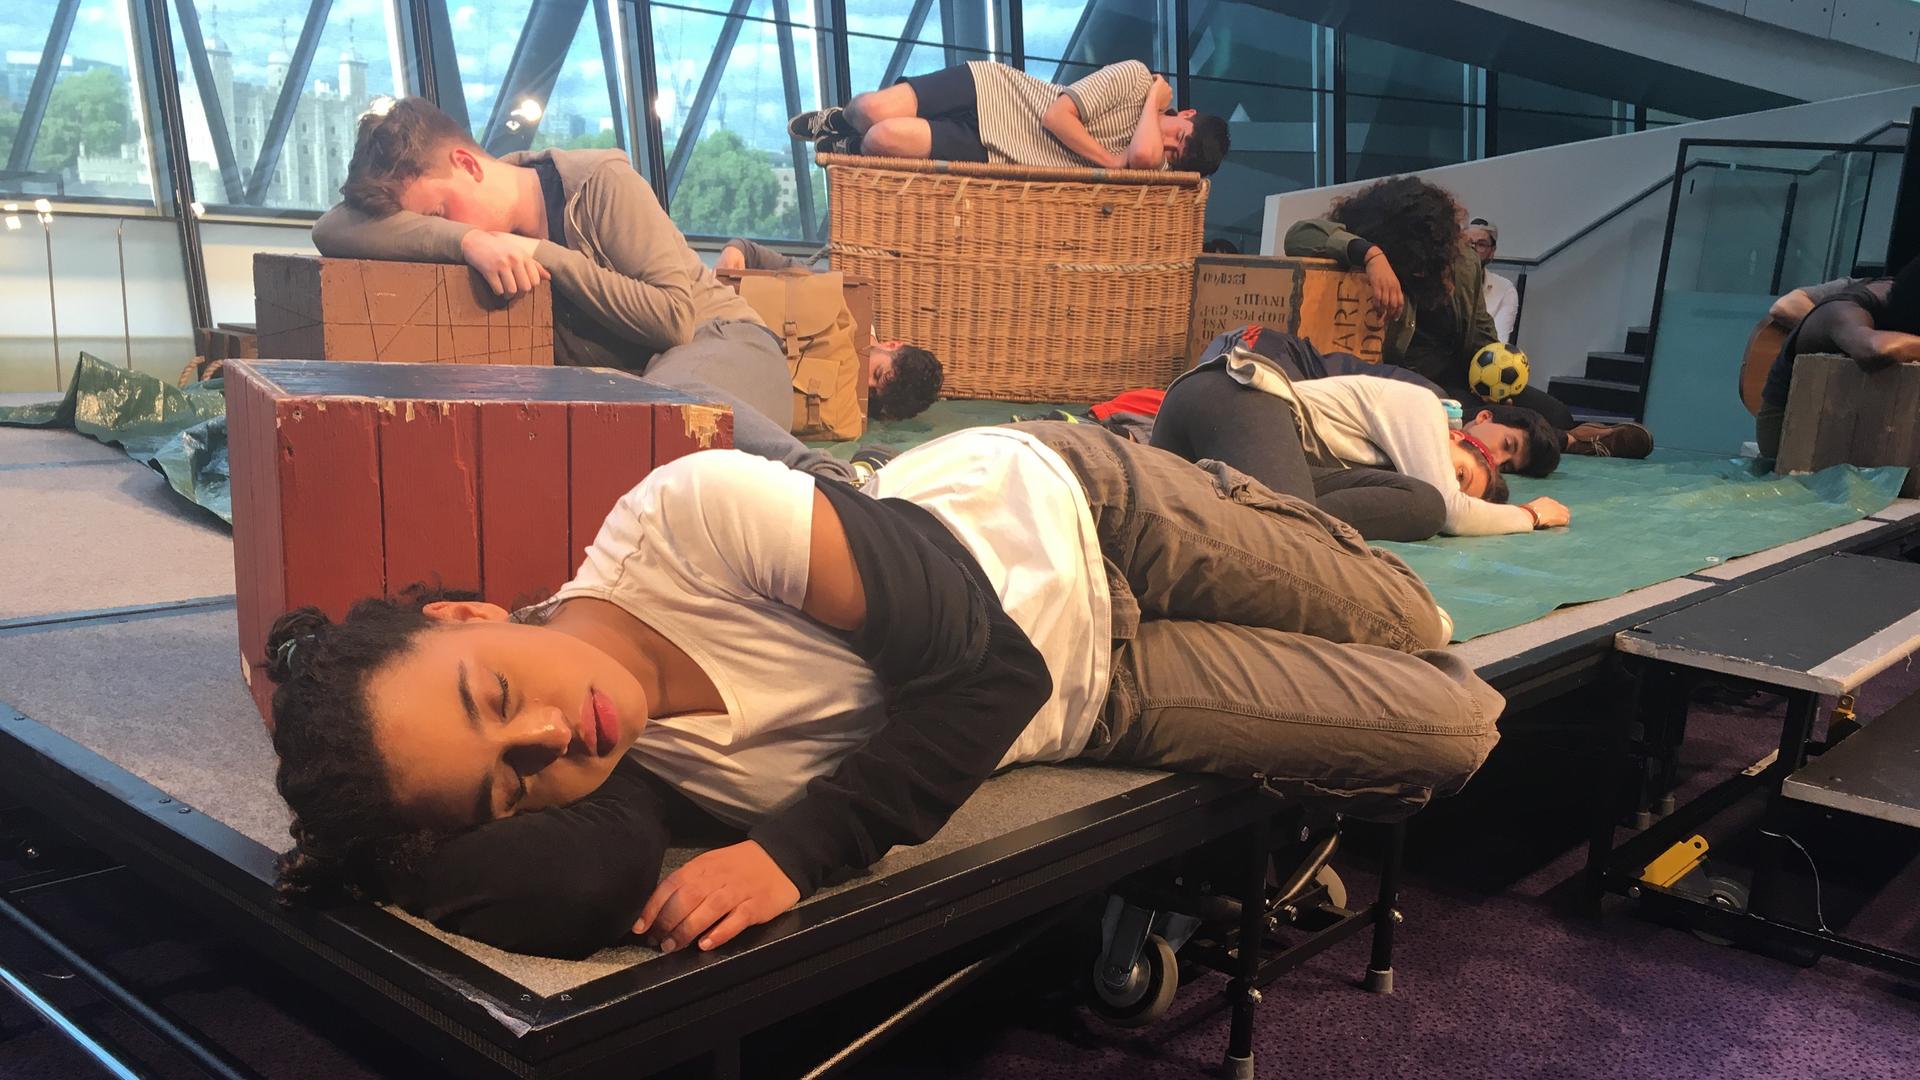 Yusra, played by Rhianna Merralls, struggles to fall asleep in the play, "Wherever I Lay My Head," performed in London City Hall.